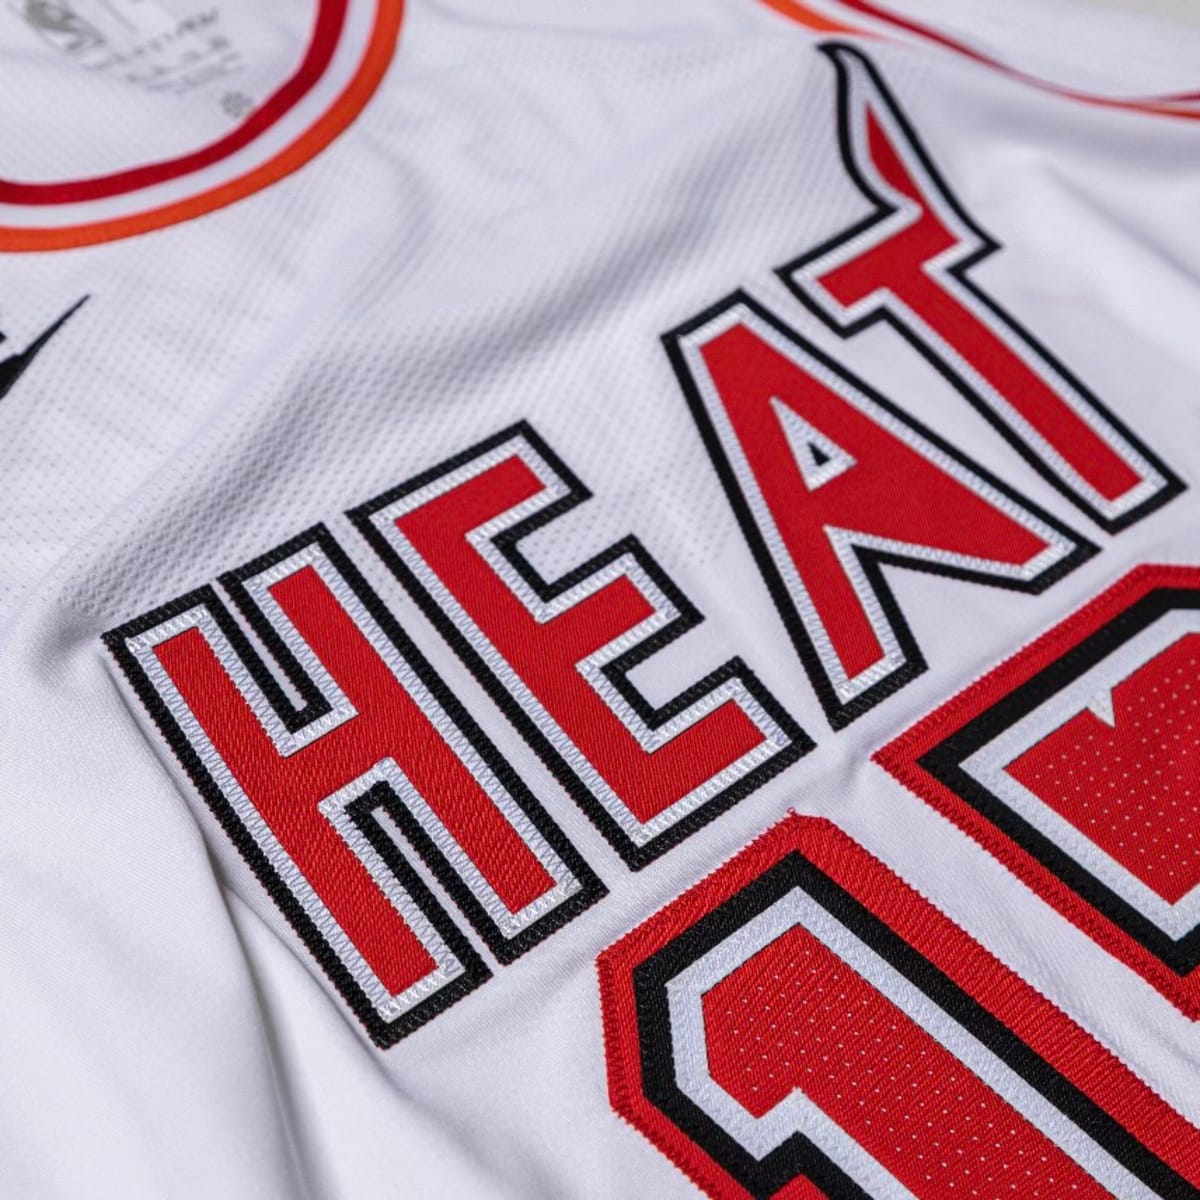 Miami Heat to Wear Black Throwback Uniforms for Home Games